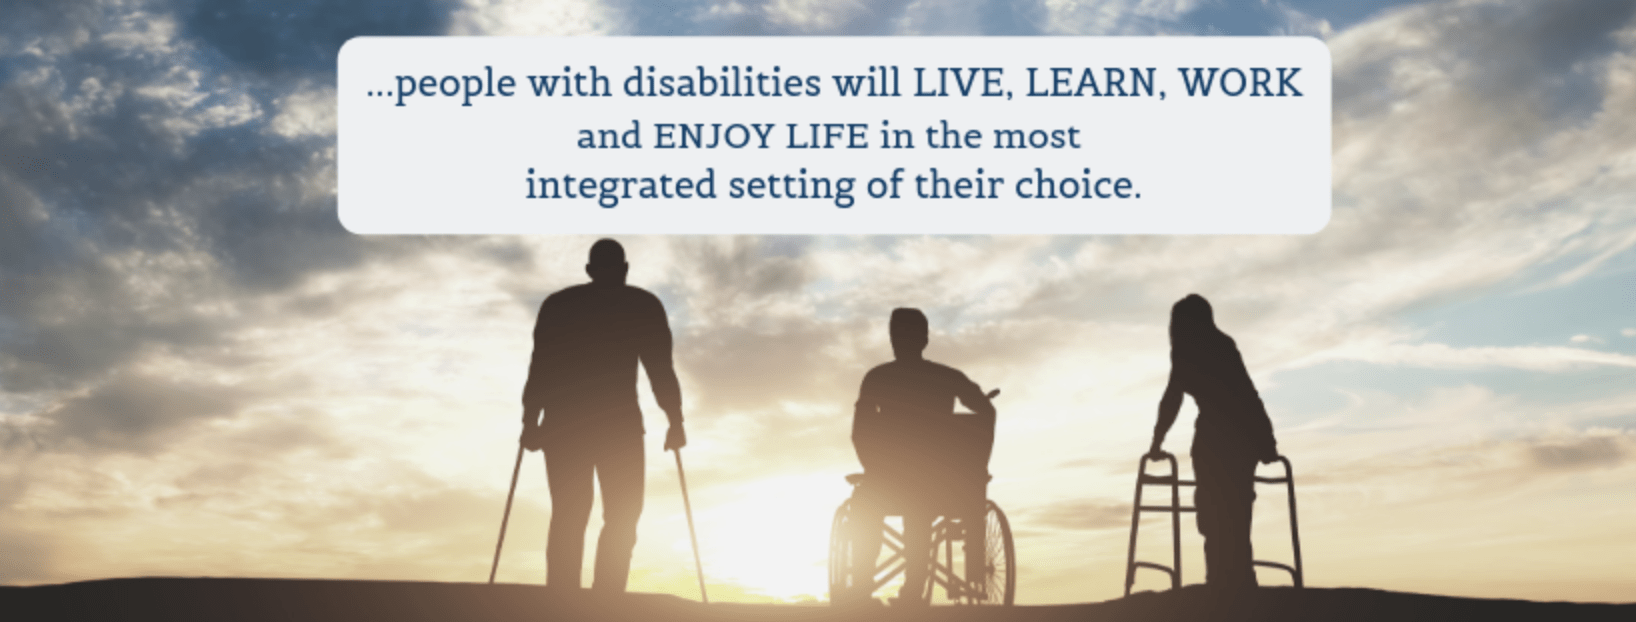 Three individuals with disabilities in silhouette against a setting sun. People with disabilities will live, learn, work and enjoy life in the most integrated setting of their choice.